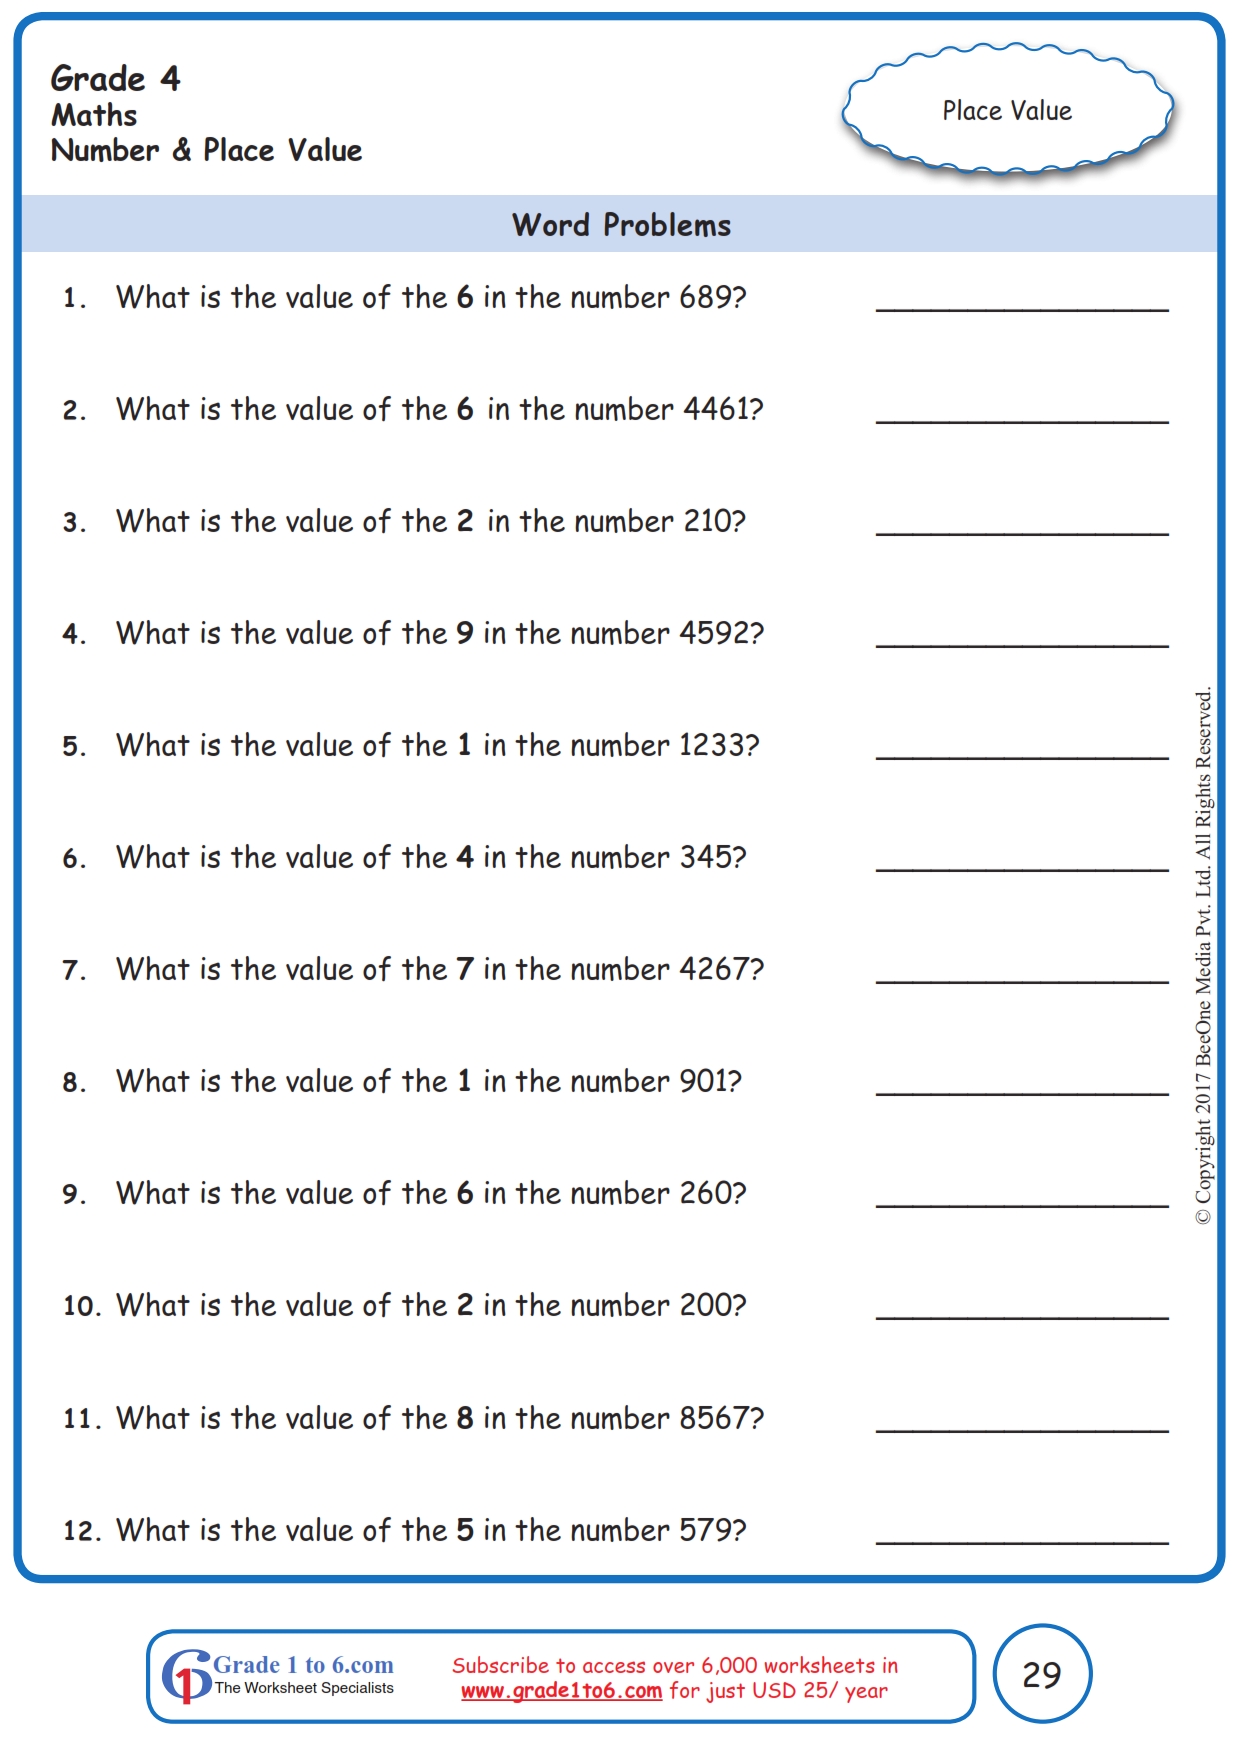 place-value-worksheets-grade-4-by-school-house-teaching-grade-4-place